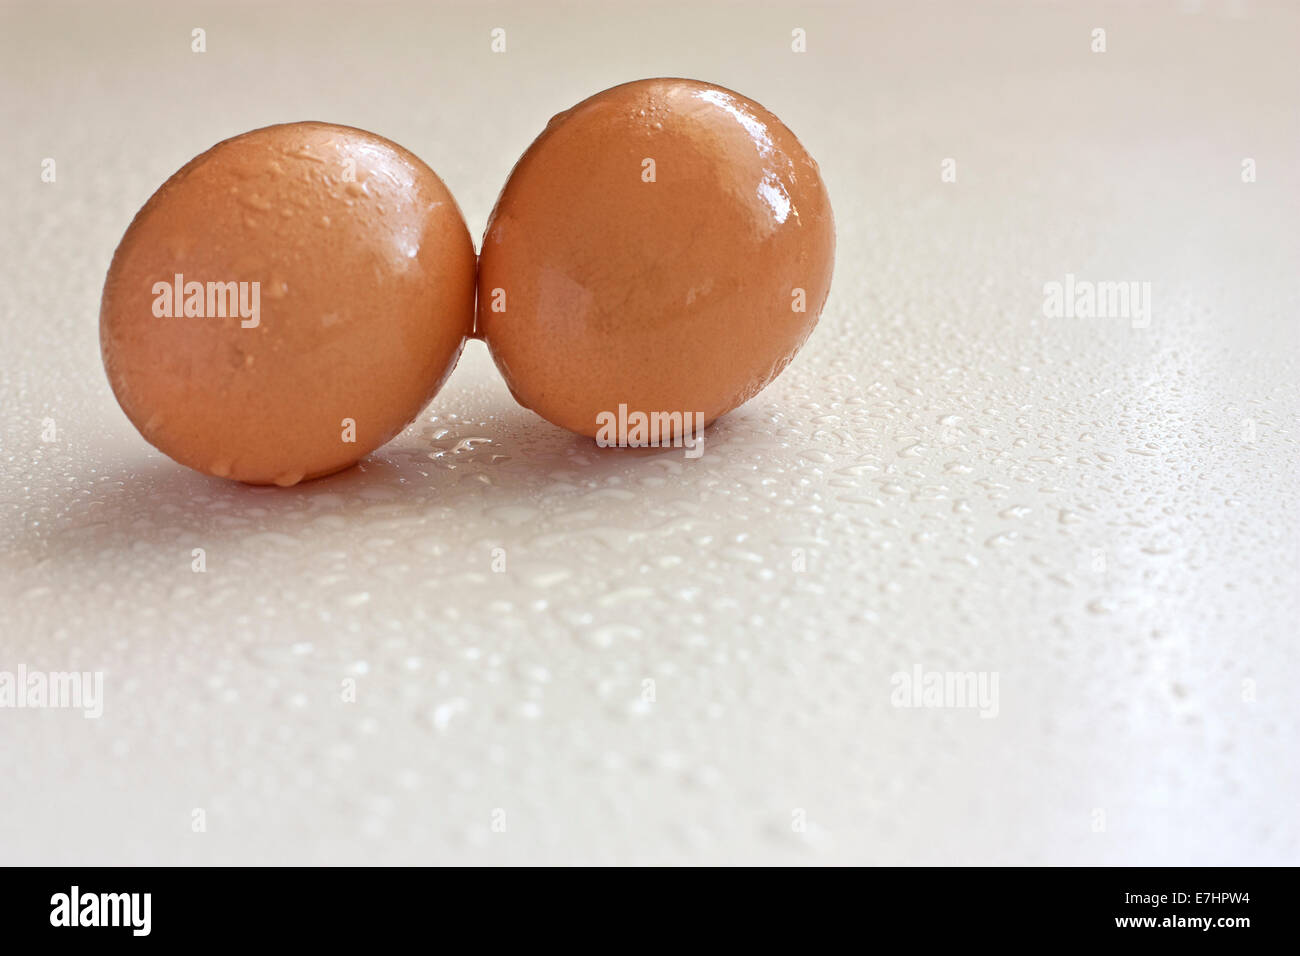 Two eggs and some water drops beside Stock Photo